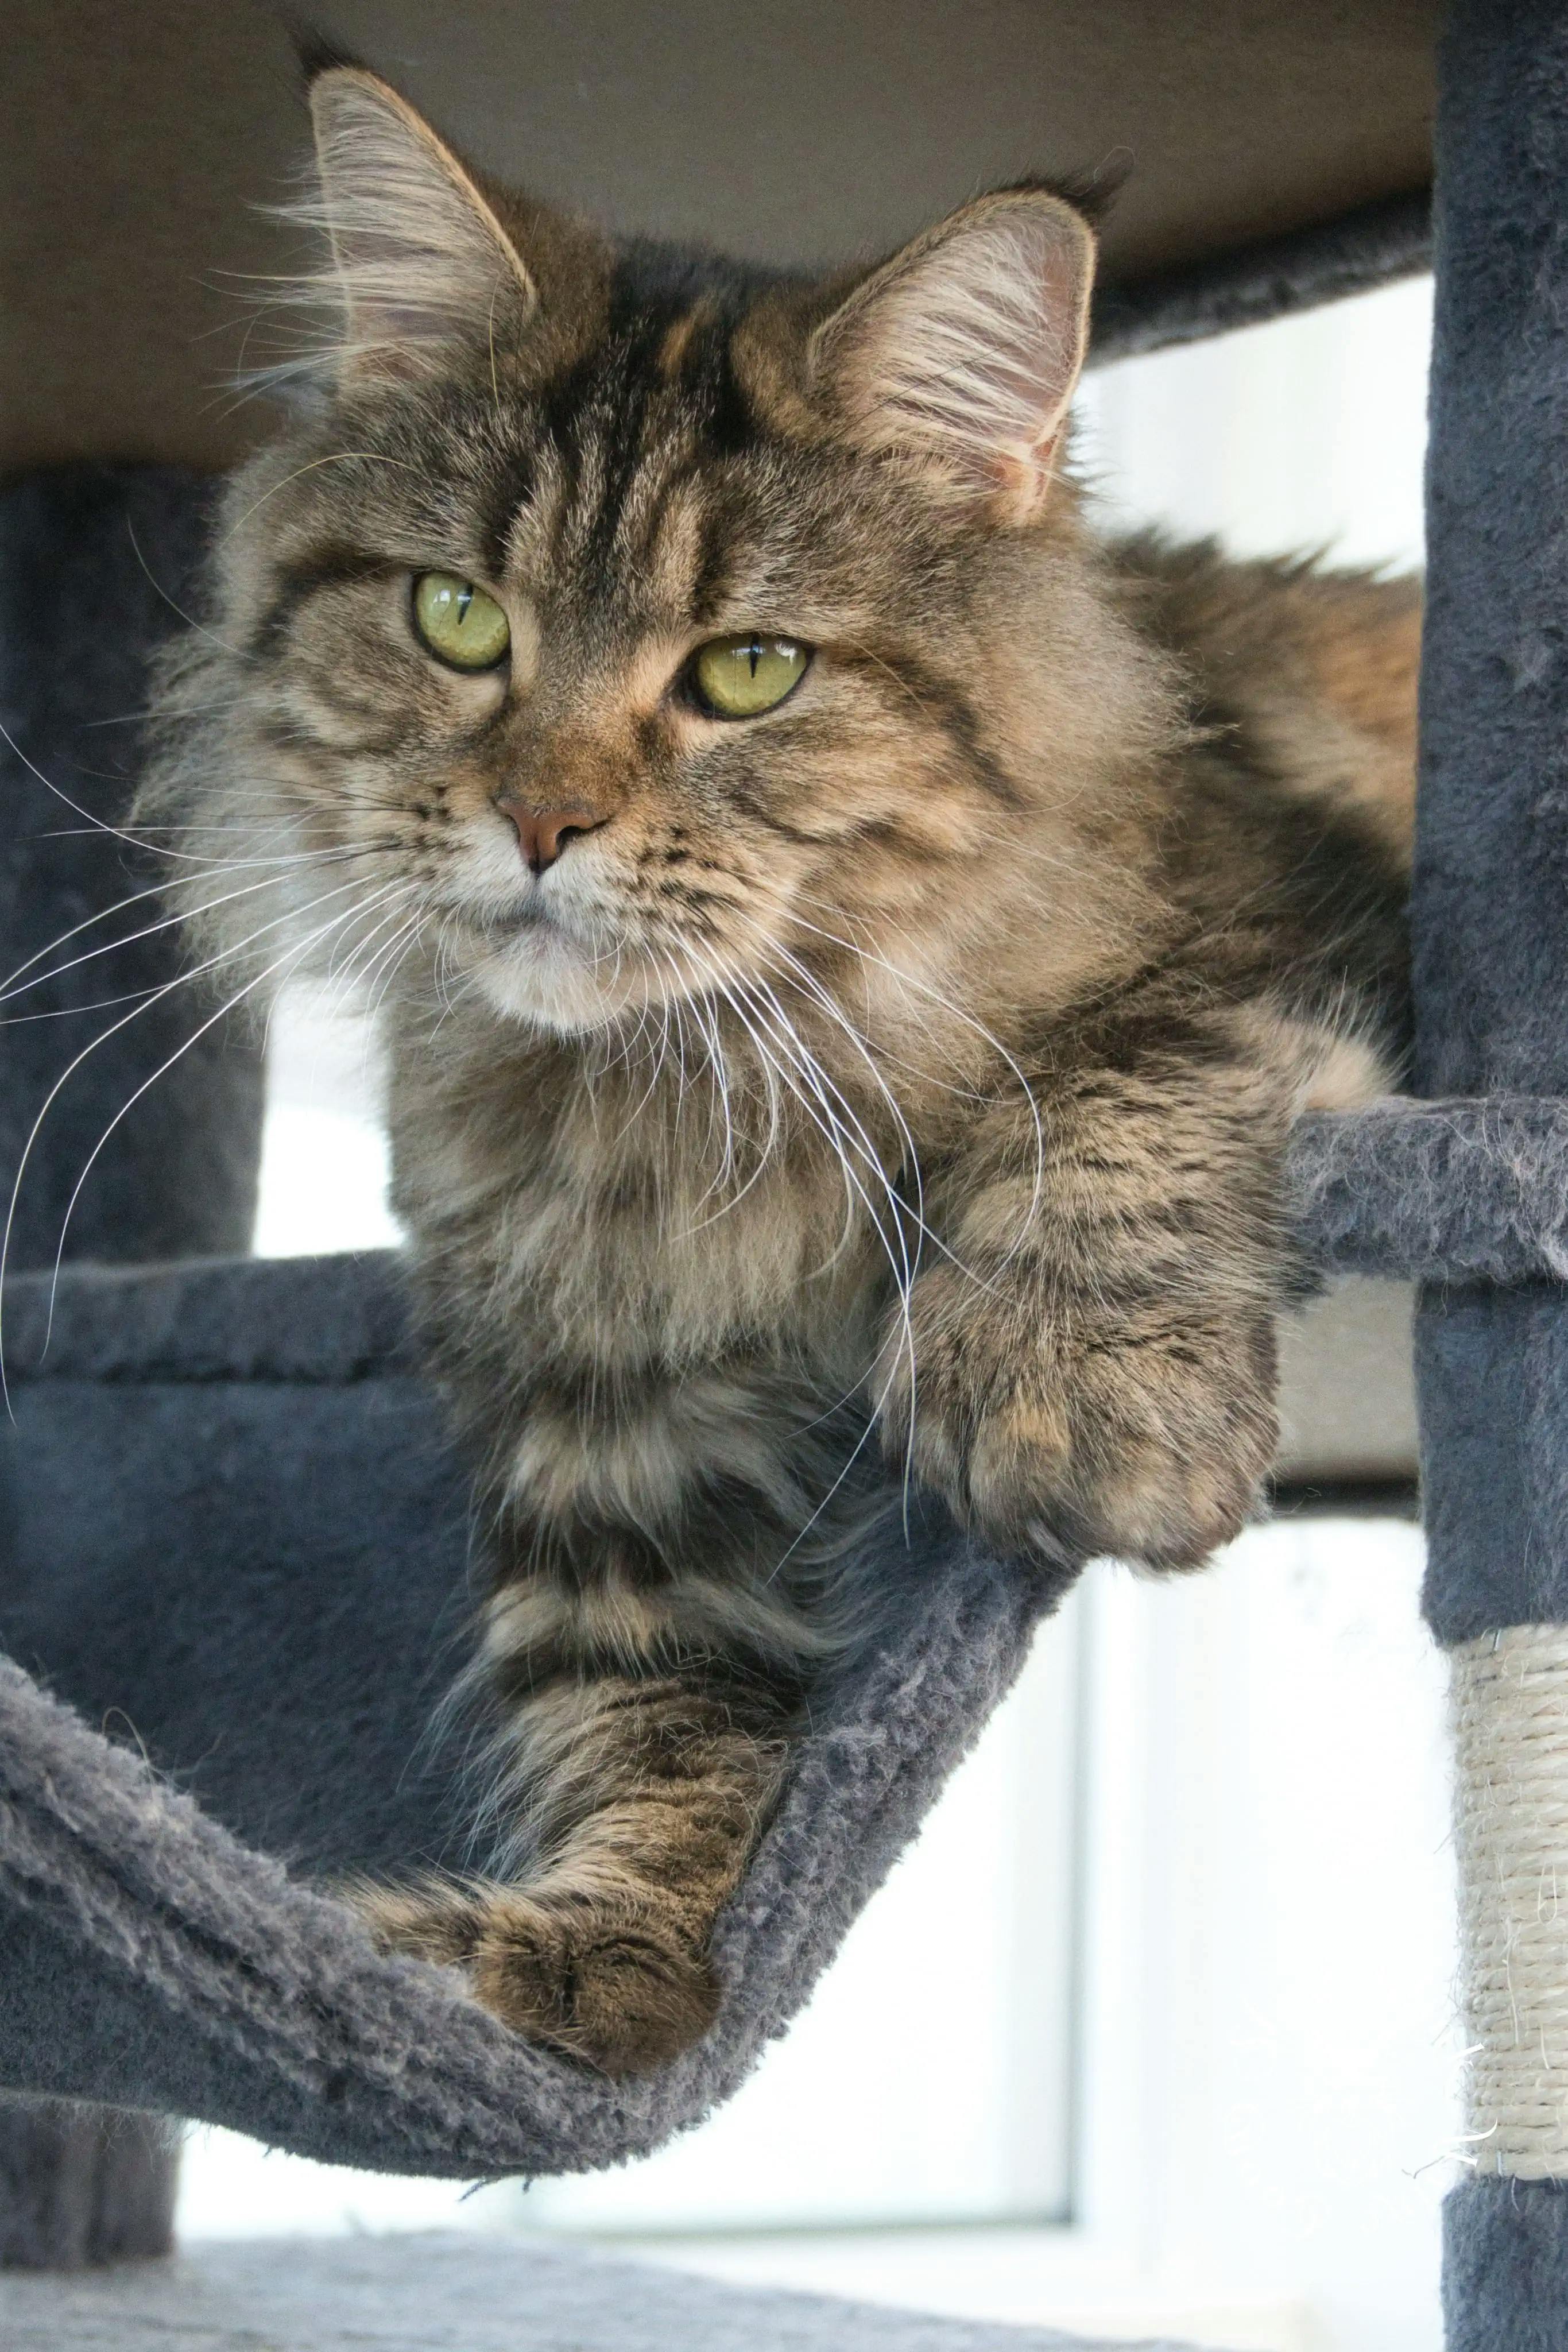 Adult Maine Coon Cat from SlowBlinkMaineCoons > queen bee izumka | female | ems code fs 22 | tortie silver tabby dillute parti color tortie | polydactyl | 93 | queen at slowblink maine coons 1